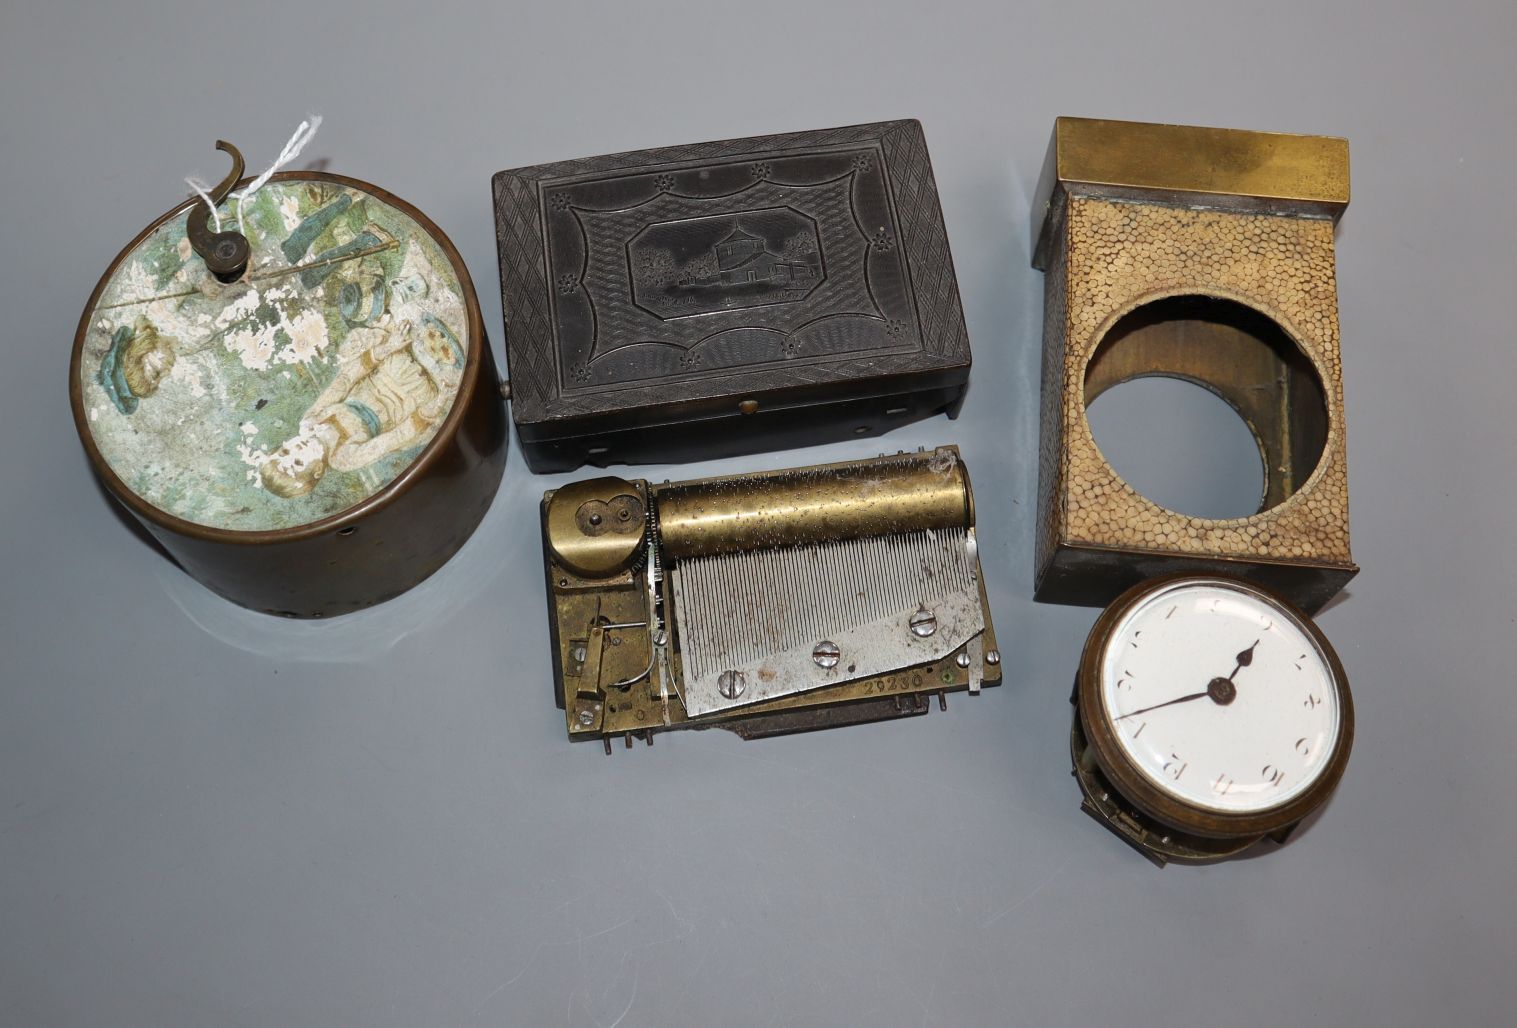 A musical box (a.f.), a circular wind-up musical box and two other items